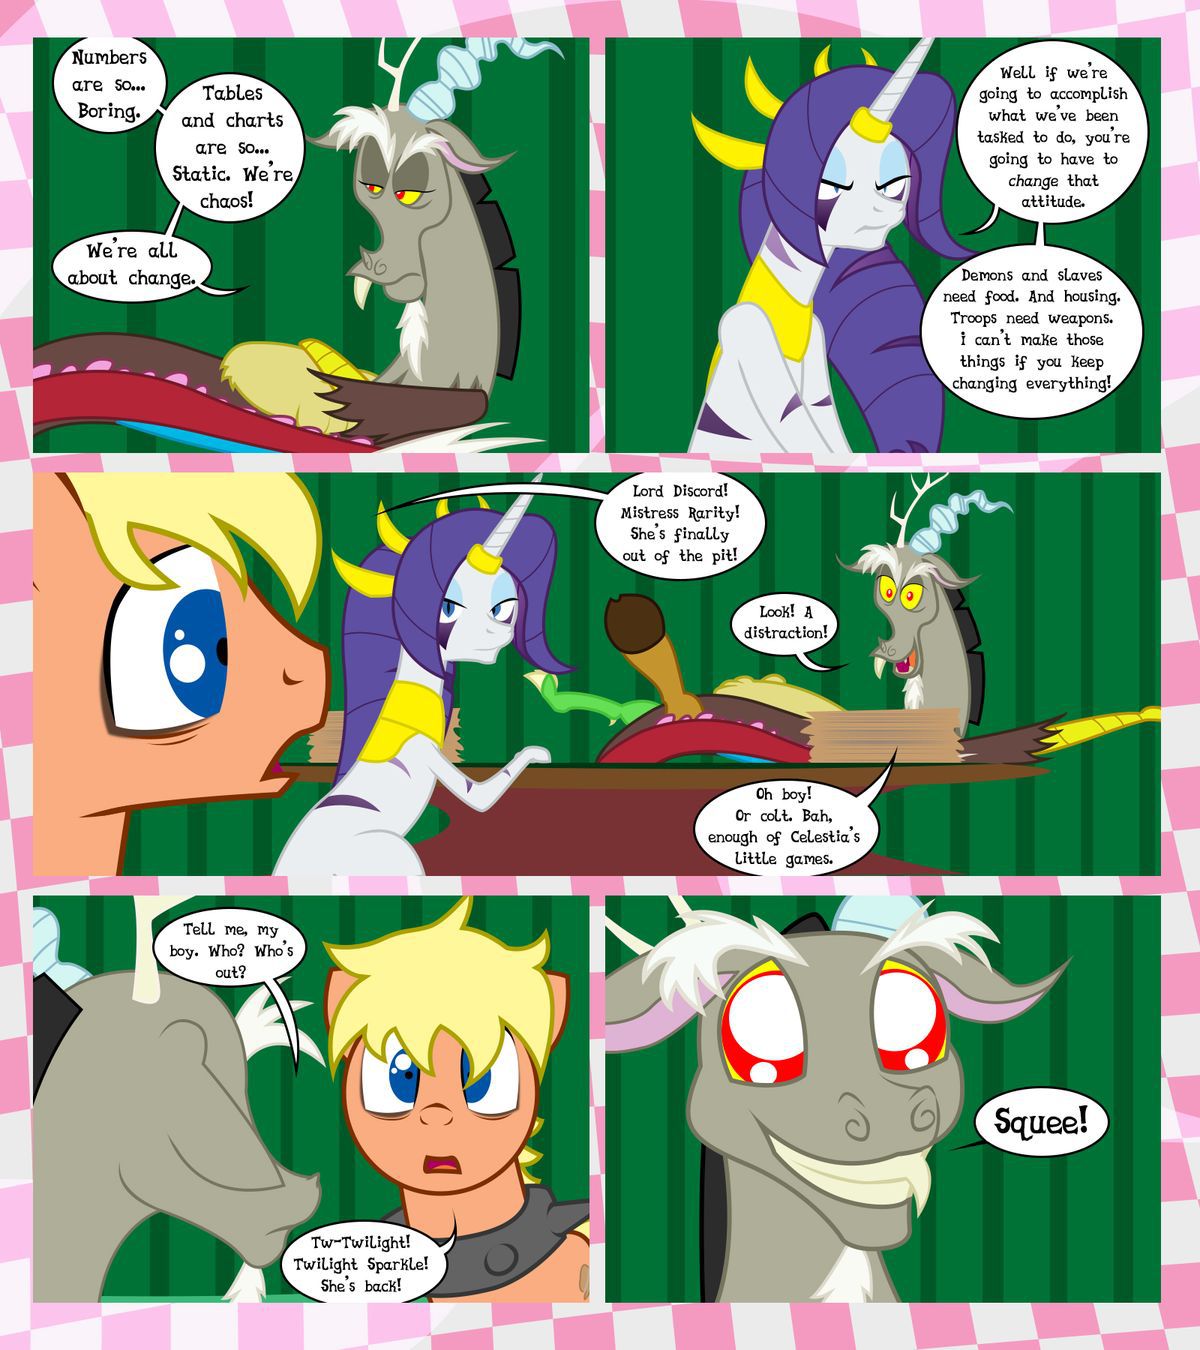 [GatesMcCloud] Cutie Mark Crusaders 10k: Chapter 3 - The Lost (My Little Pony: Friendship is Magic) [English] [Ongoing] 13